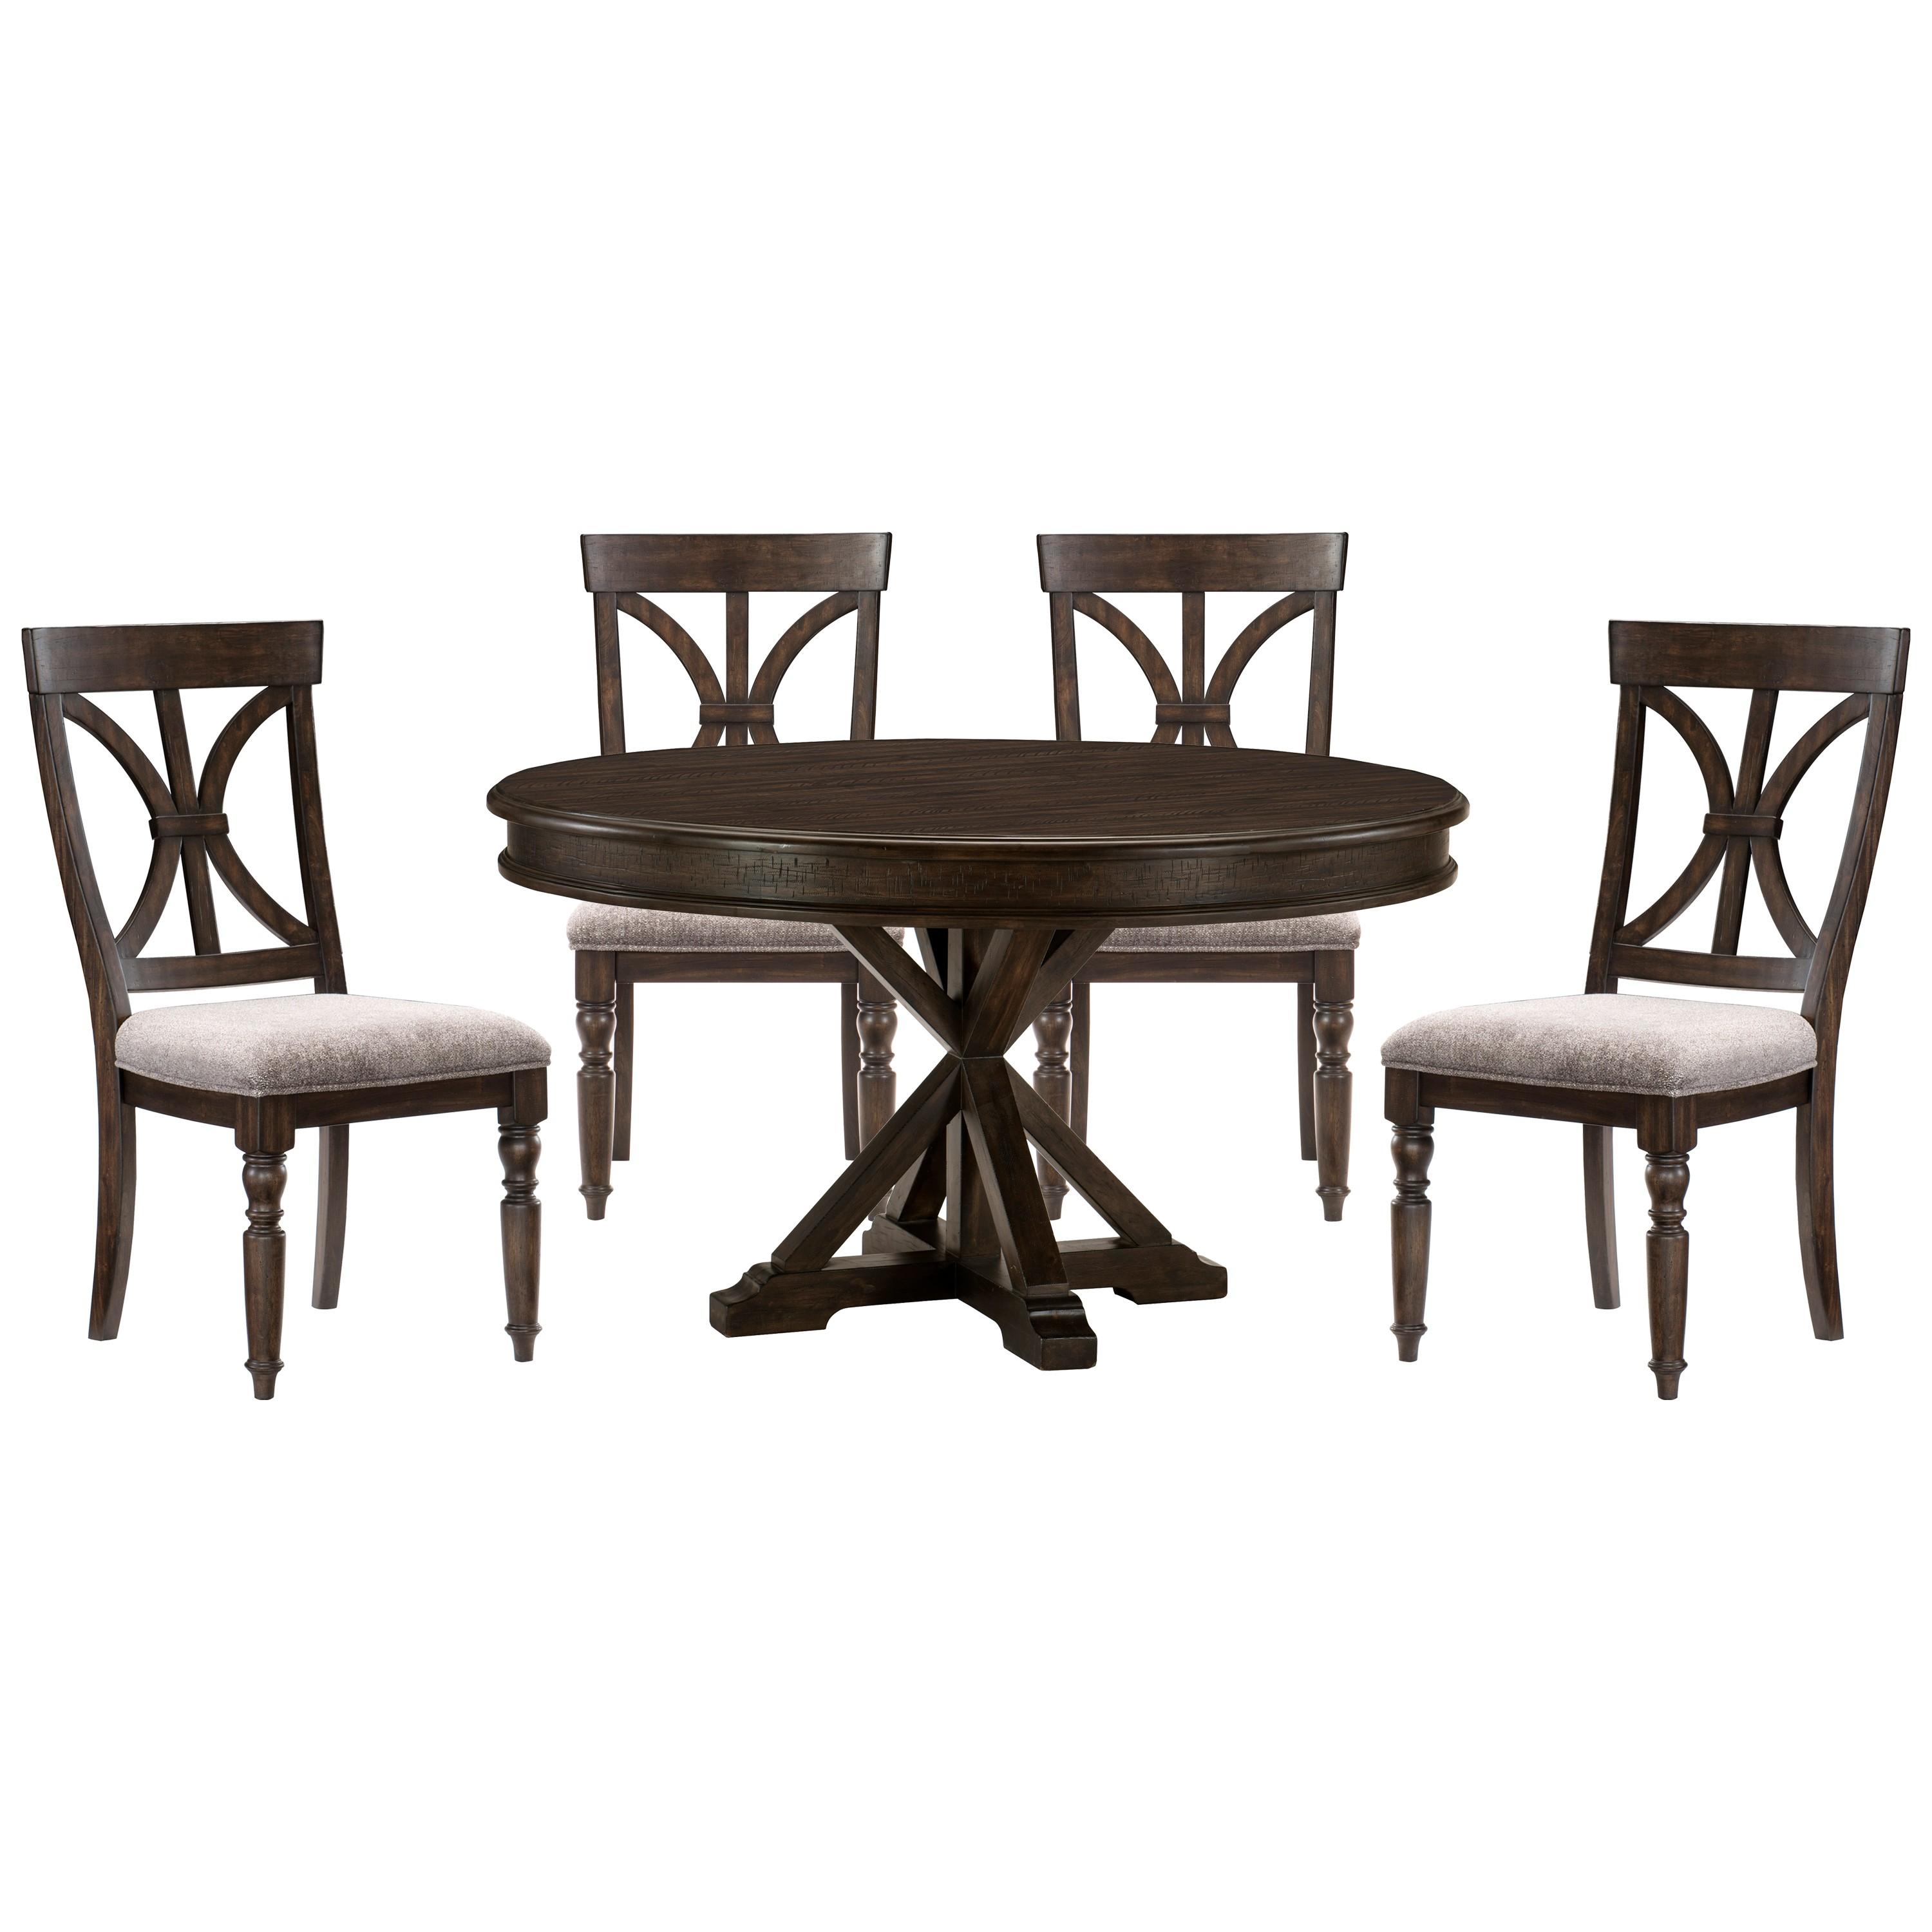 Transitional Dining Room Set 1689-54*5PC Cardano 1689-54*5PC in Charcoal Polyester